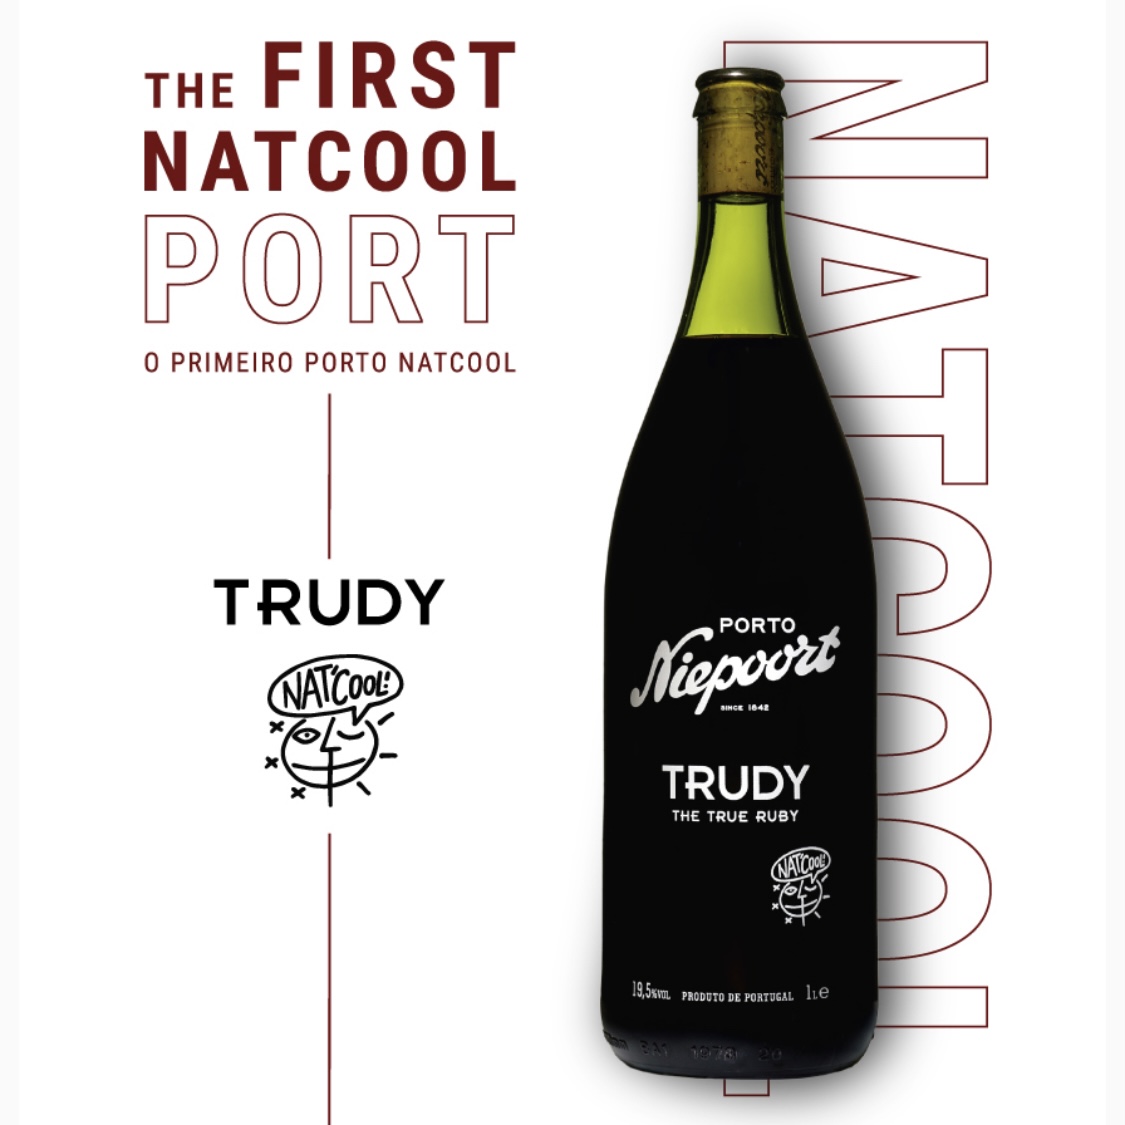 The FIRST Nat'cool PORT - Trudy is the true Ruby #rubyport #trudytrueruby #natcool #niepoort #niepoorteffect #alwaysrespectthefirstrule